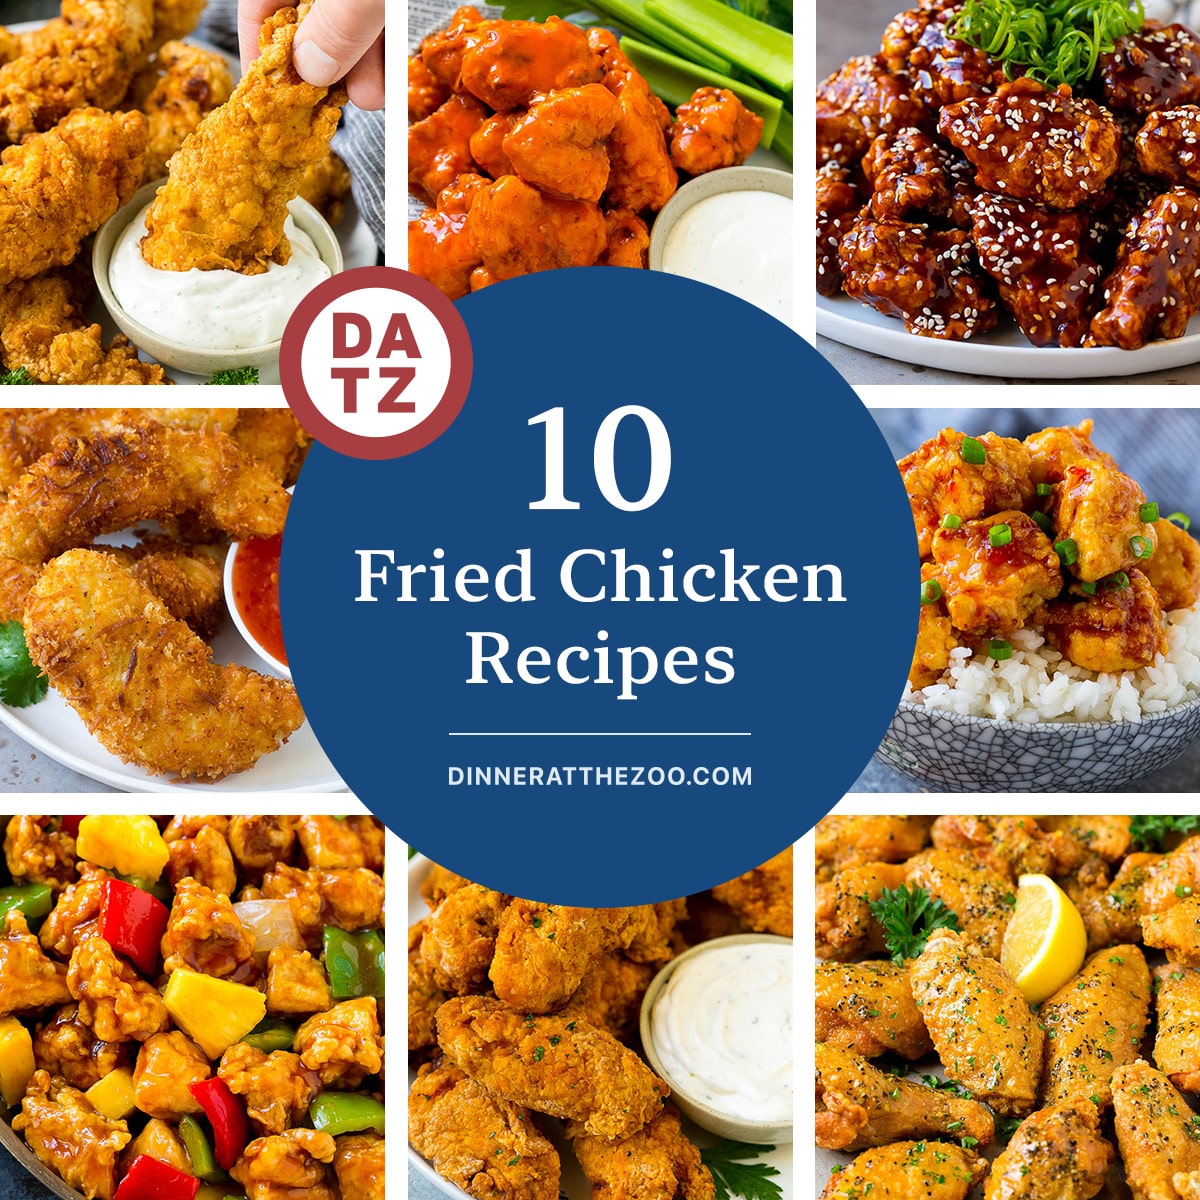 A collection of fabulous fried chicken recipes including buffalo chicken nuggets, fried chicken wings and sweet and sour chicken.